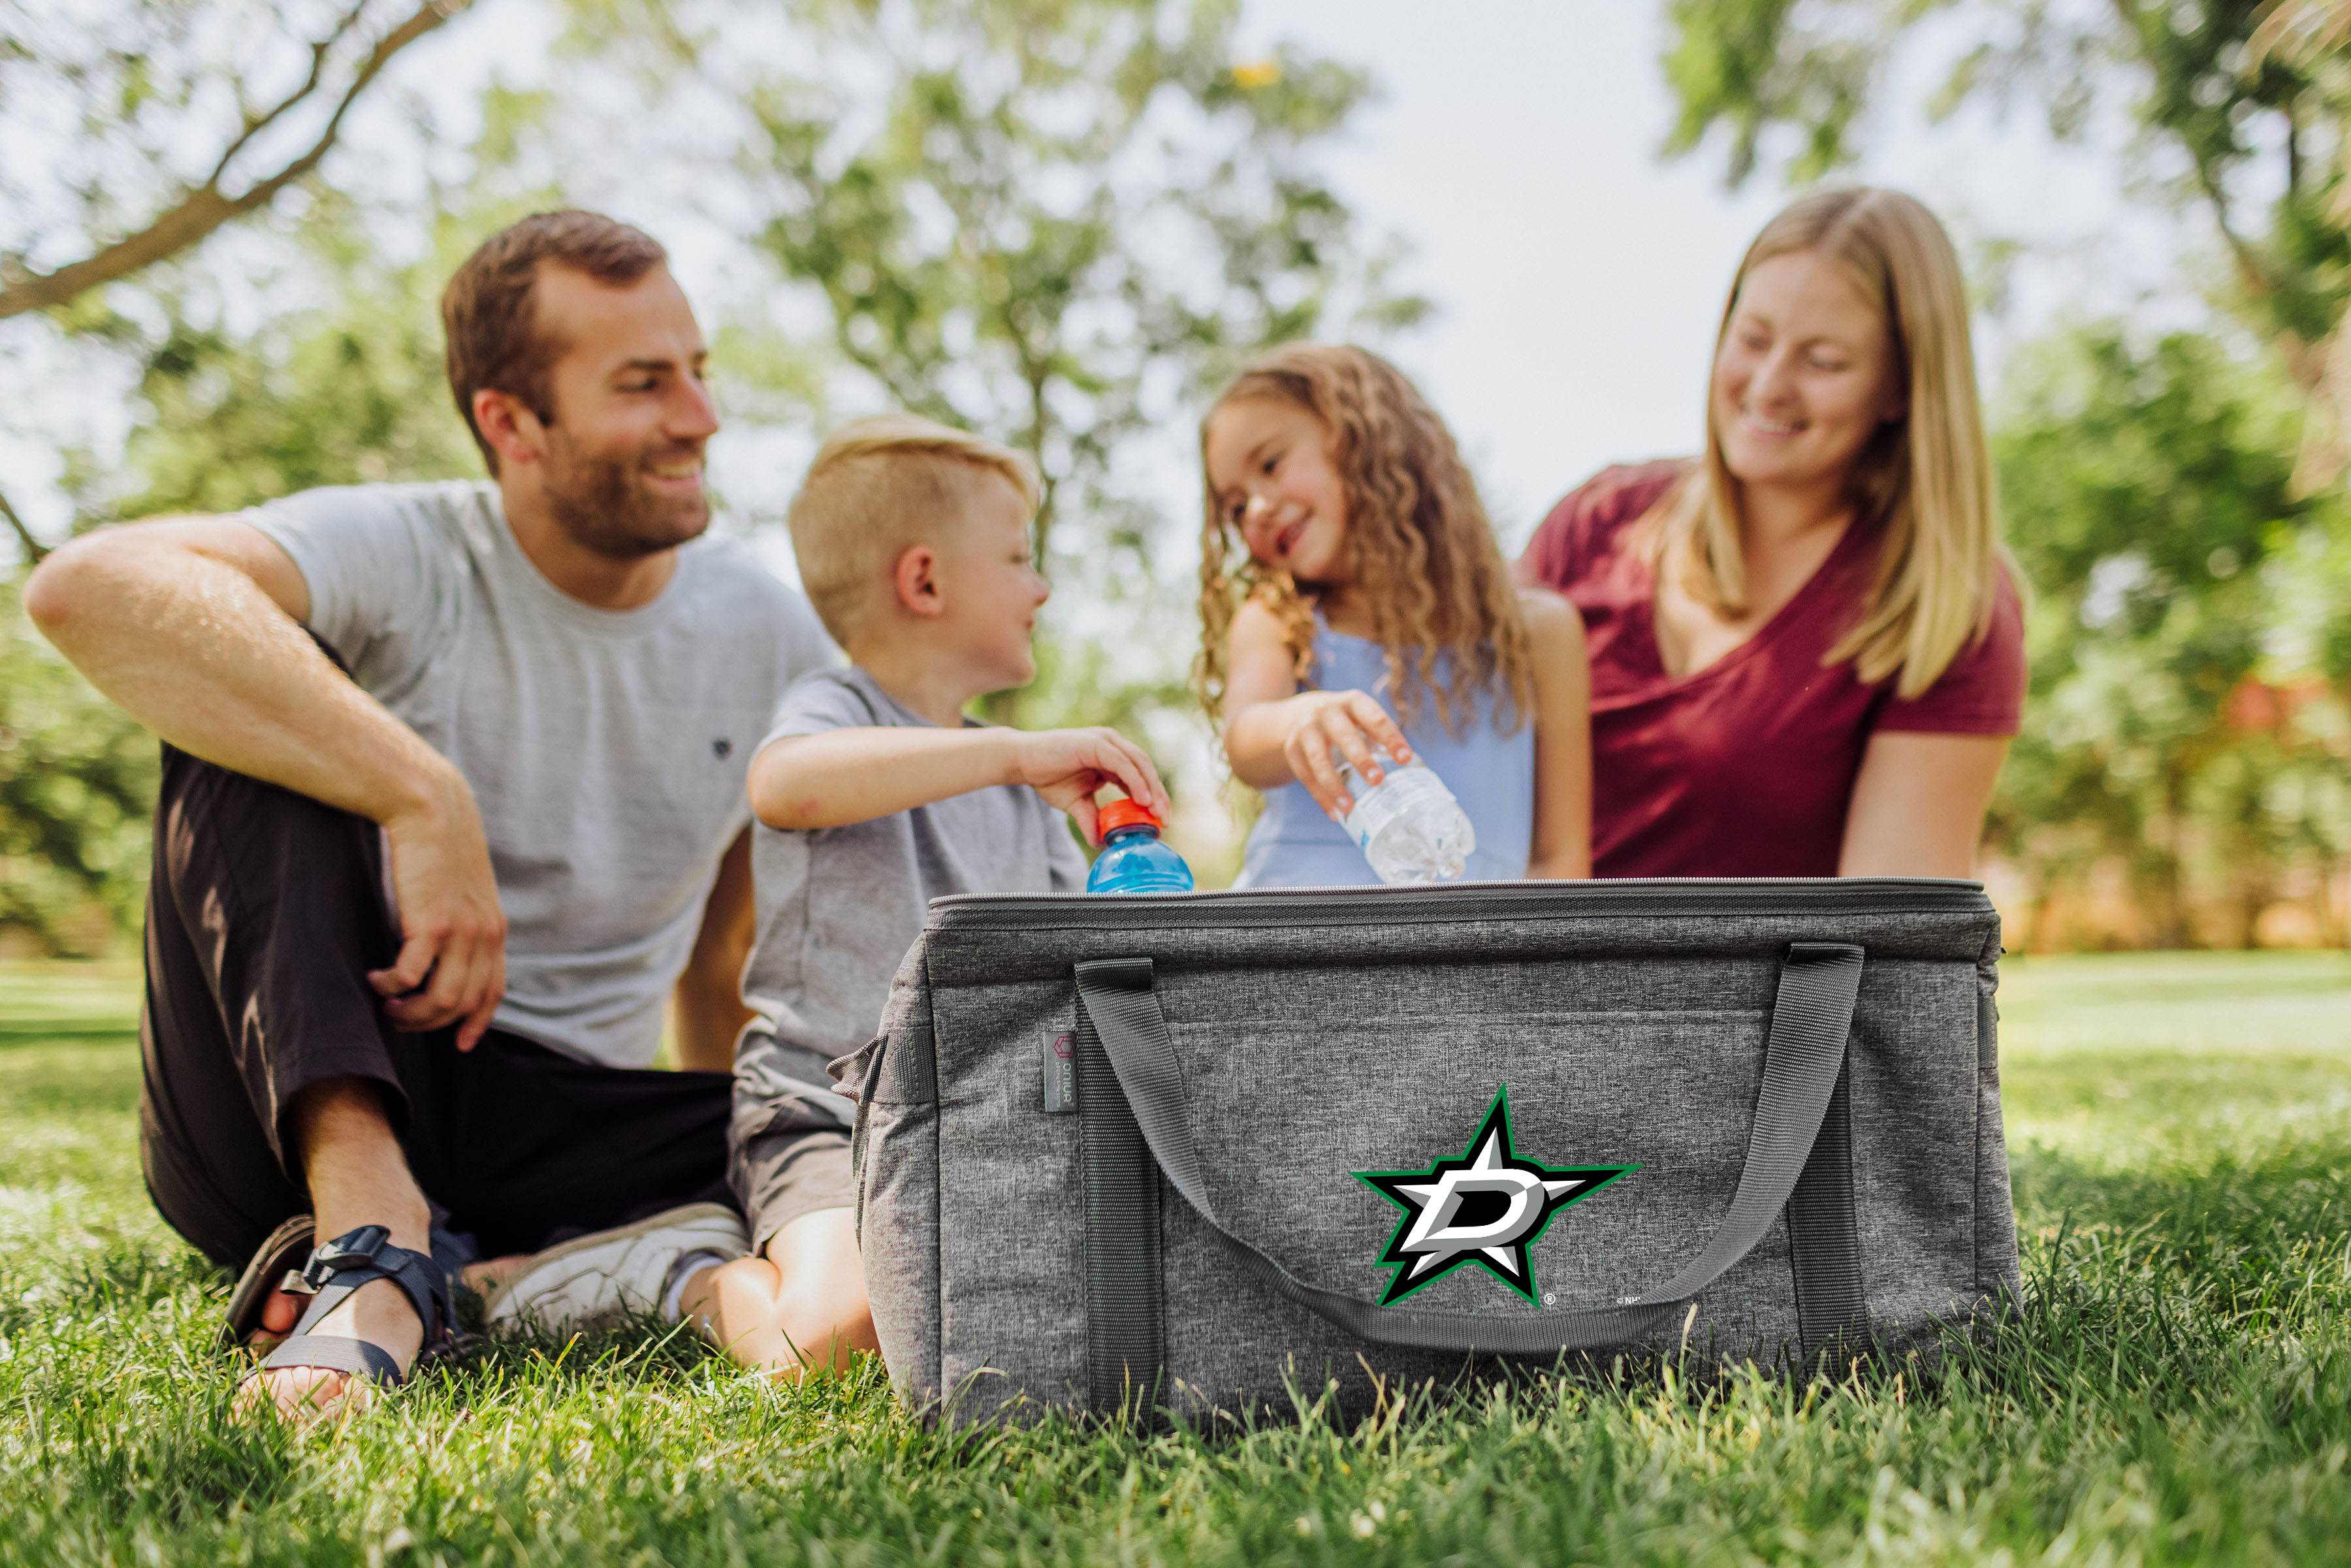 Dallas Stars - 64 Can Collapsible Cooler